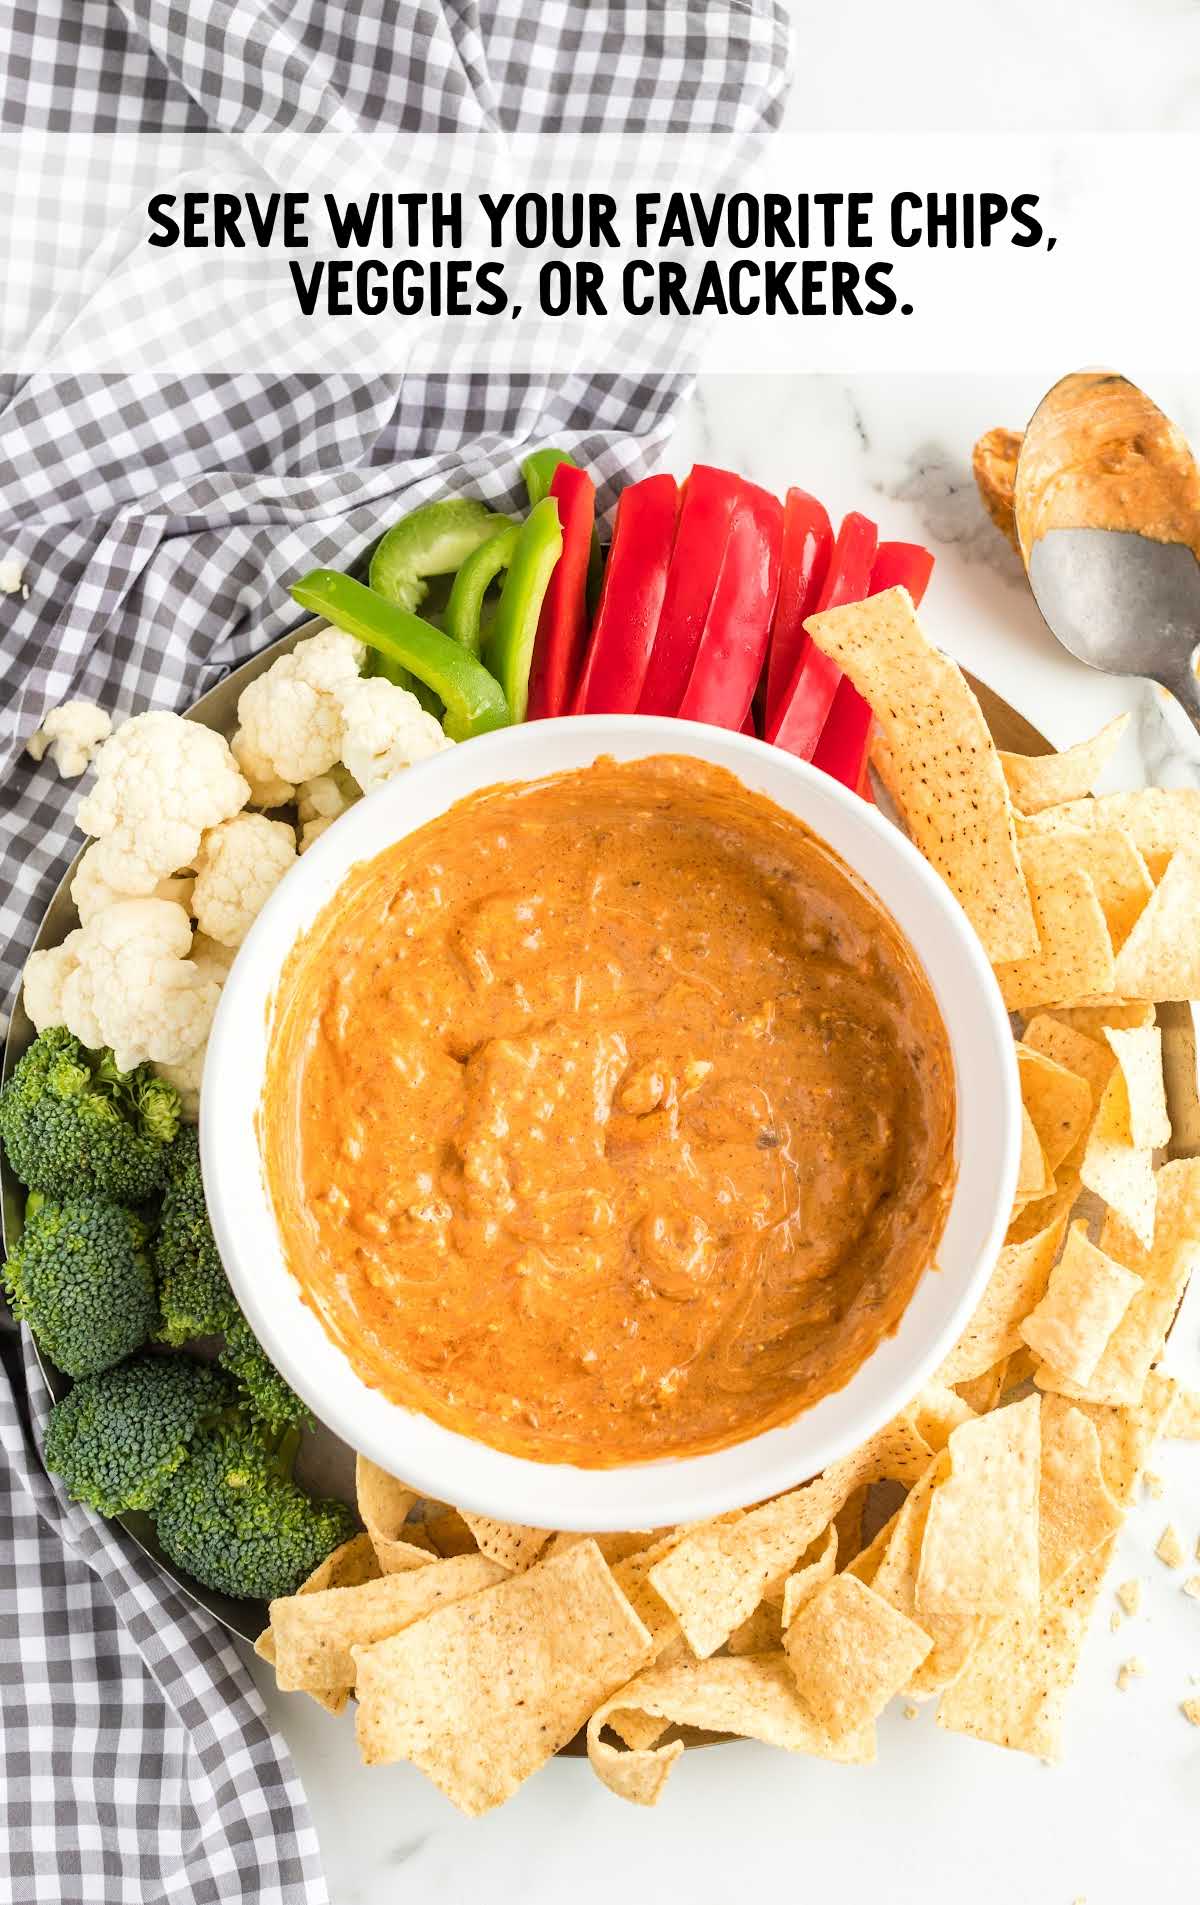 chili cheese dip served with chips and veggies